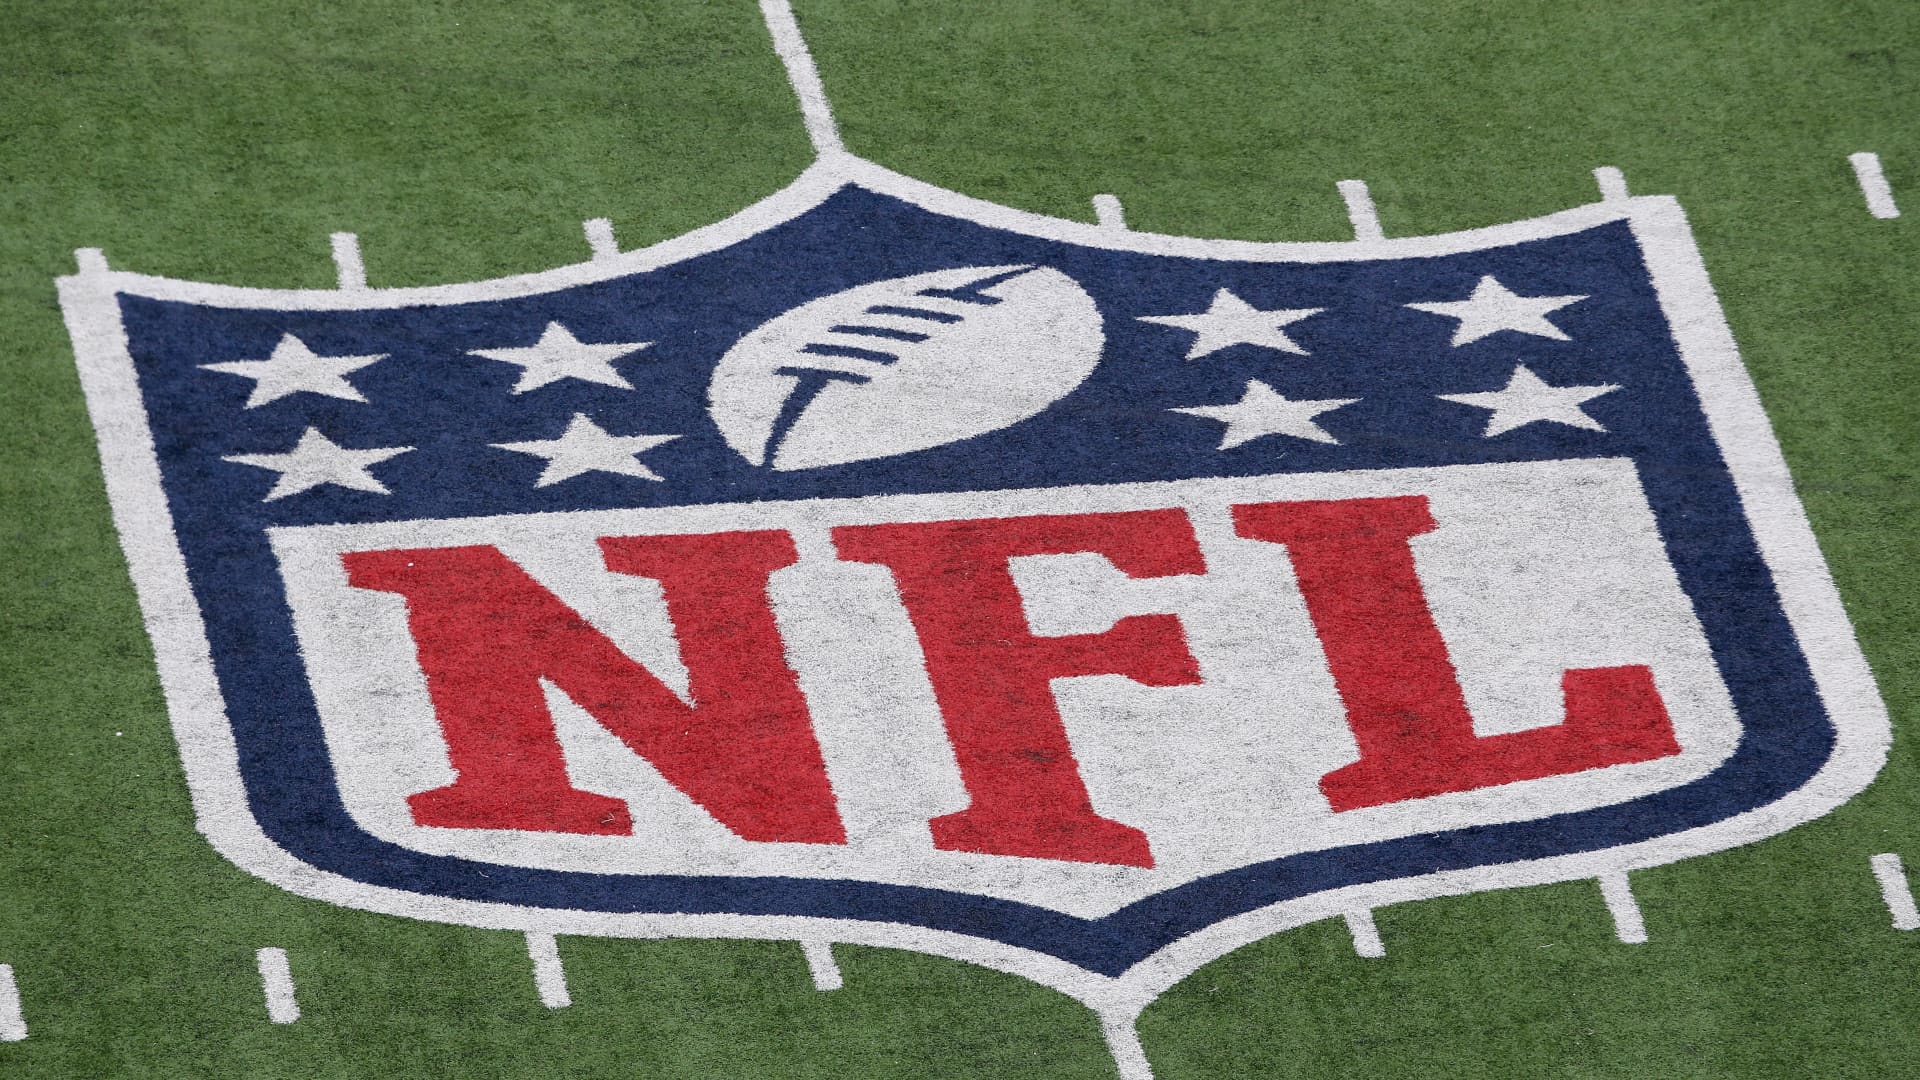 The NFL is offering buyouts to more than 200 employees